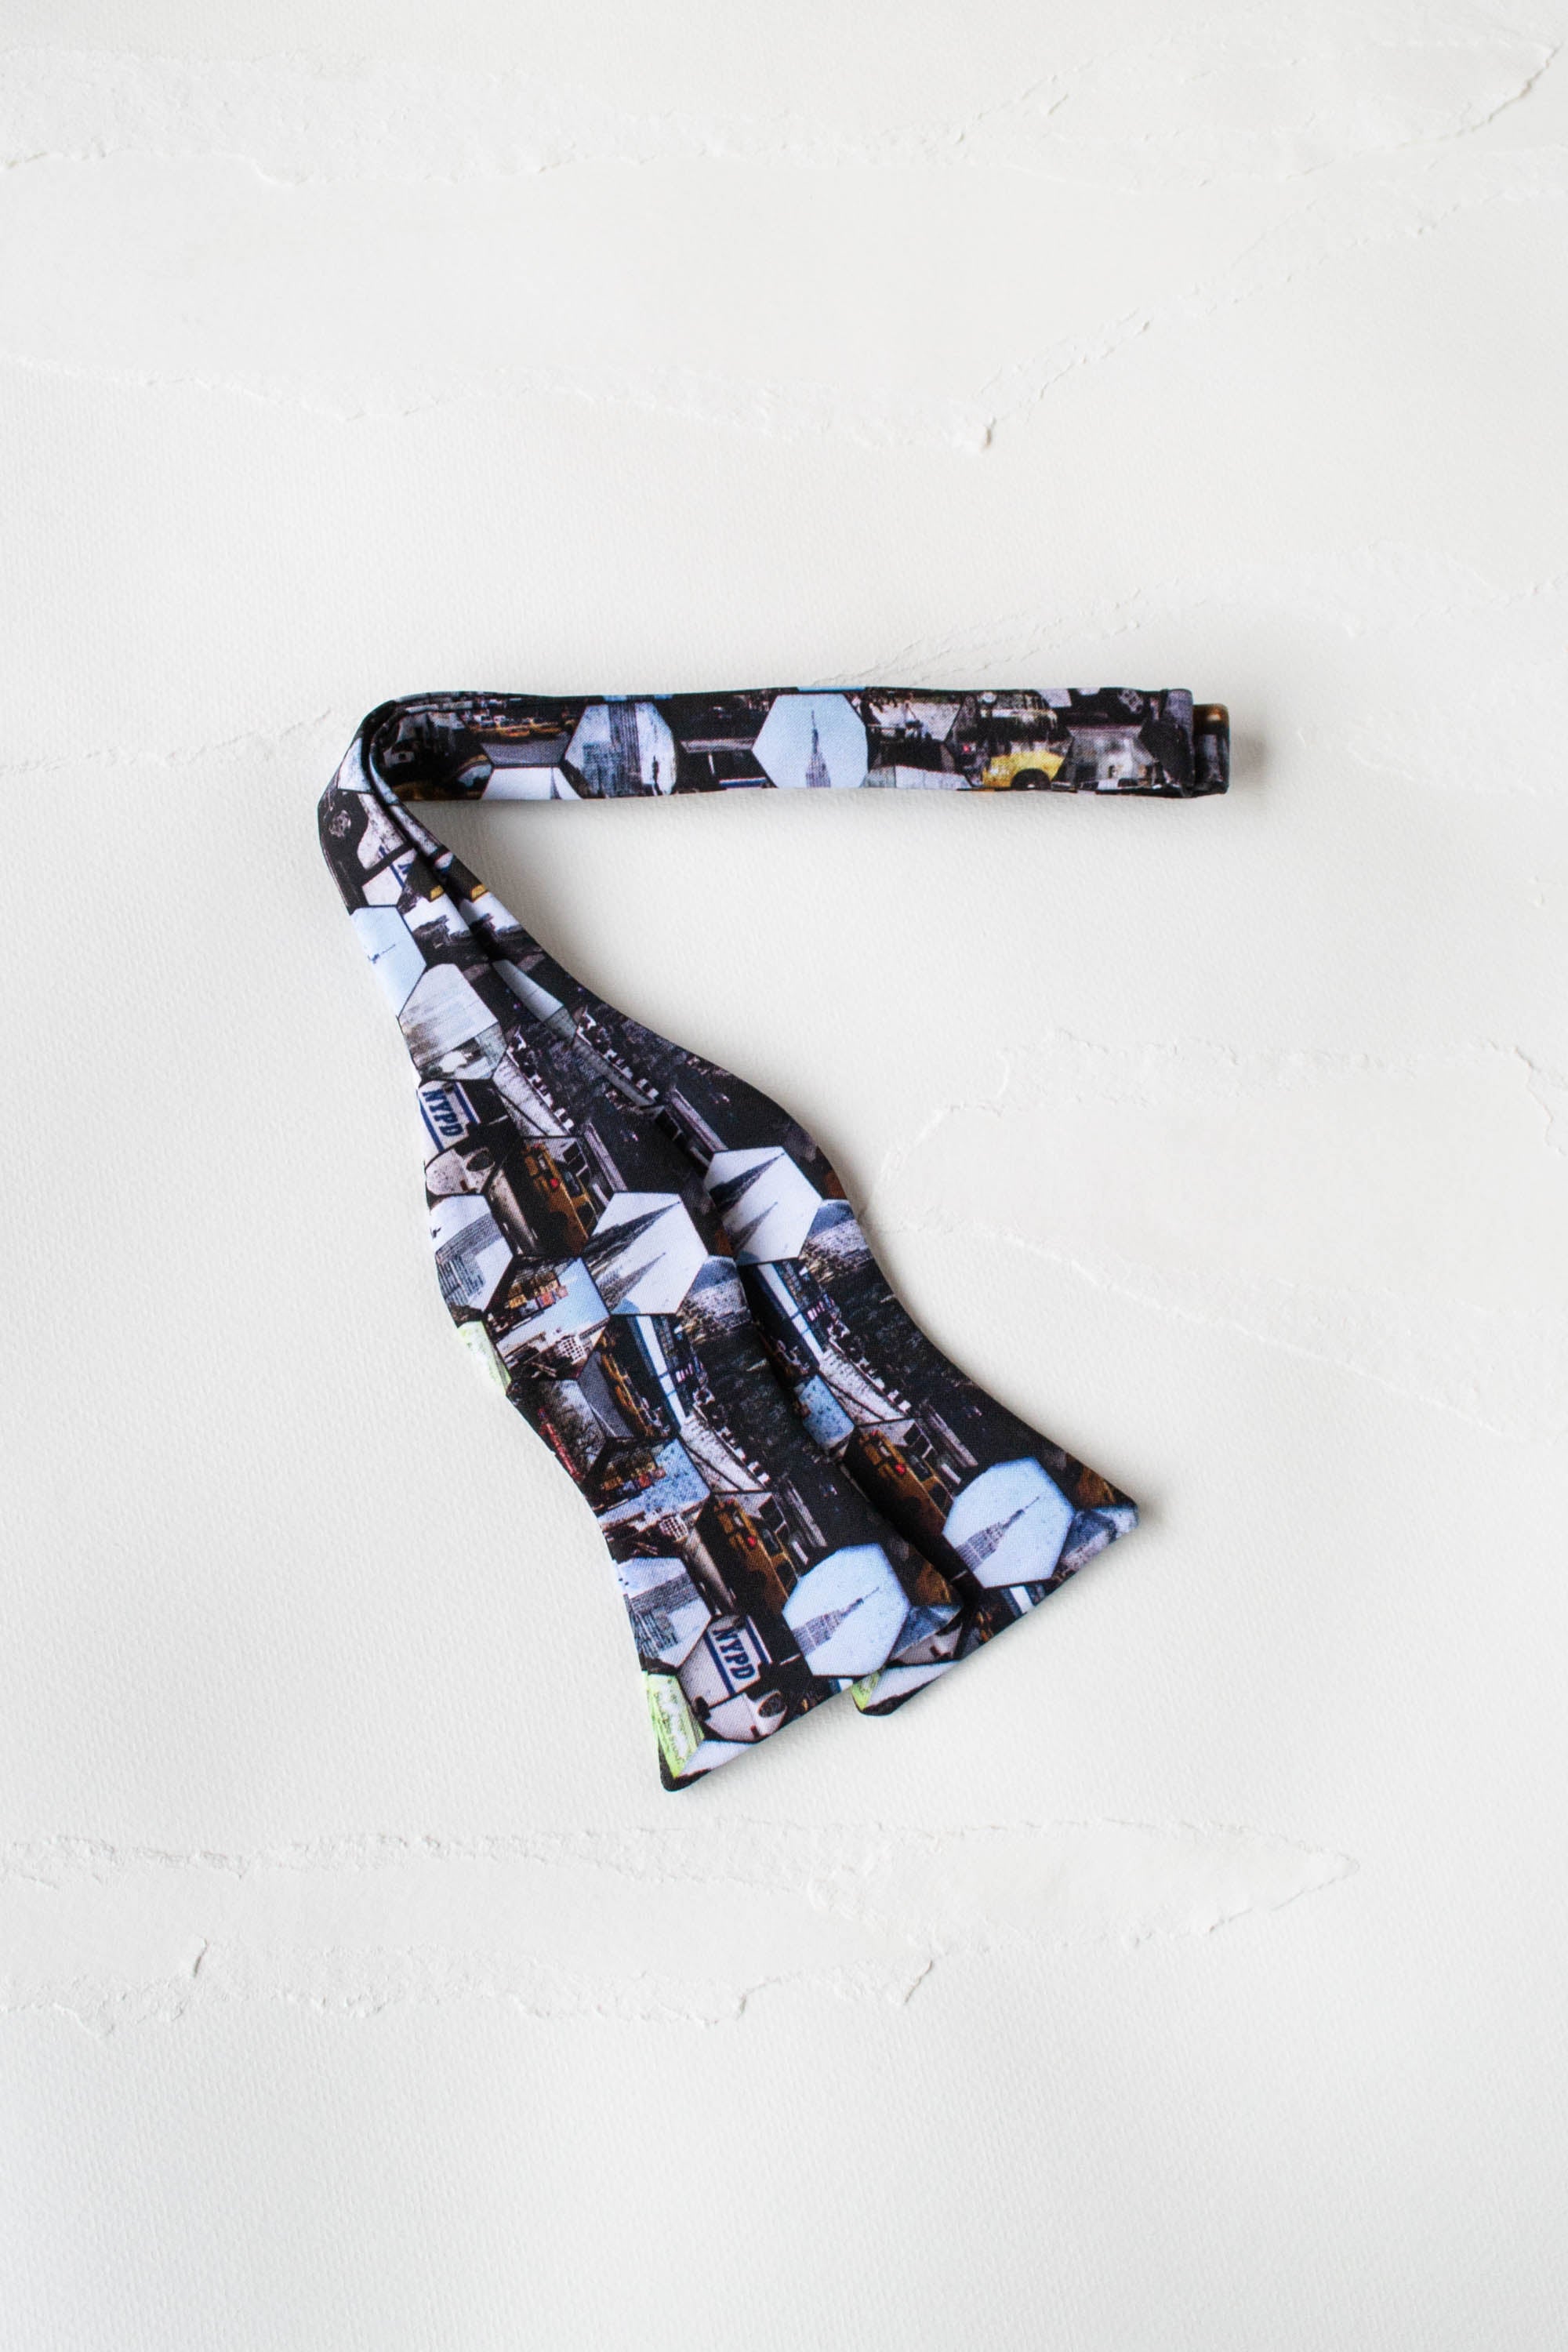 Bickle Bow Tie